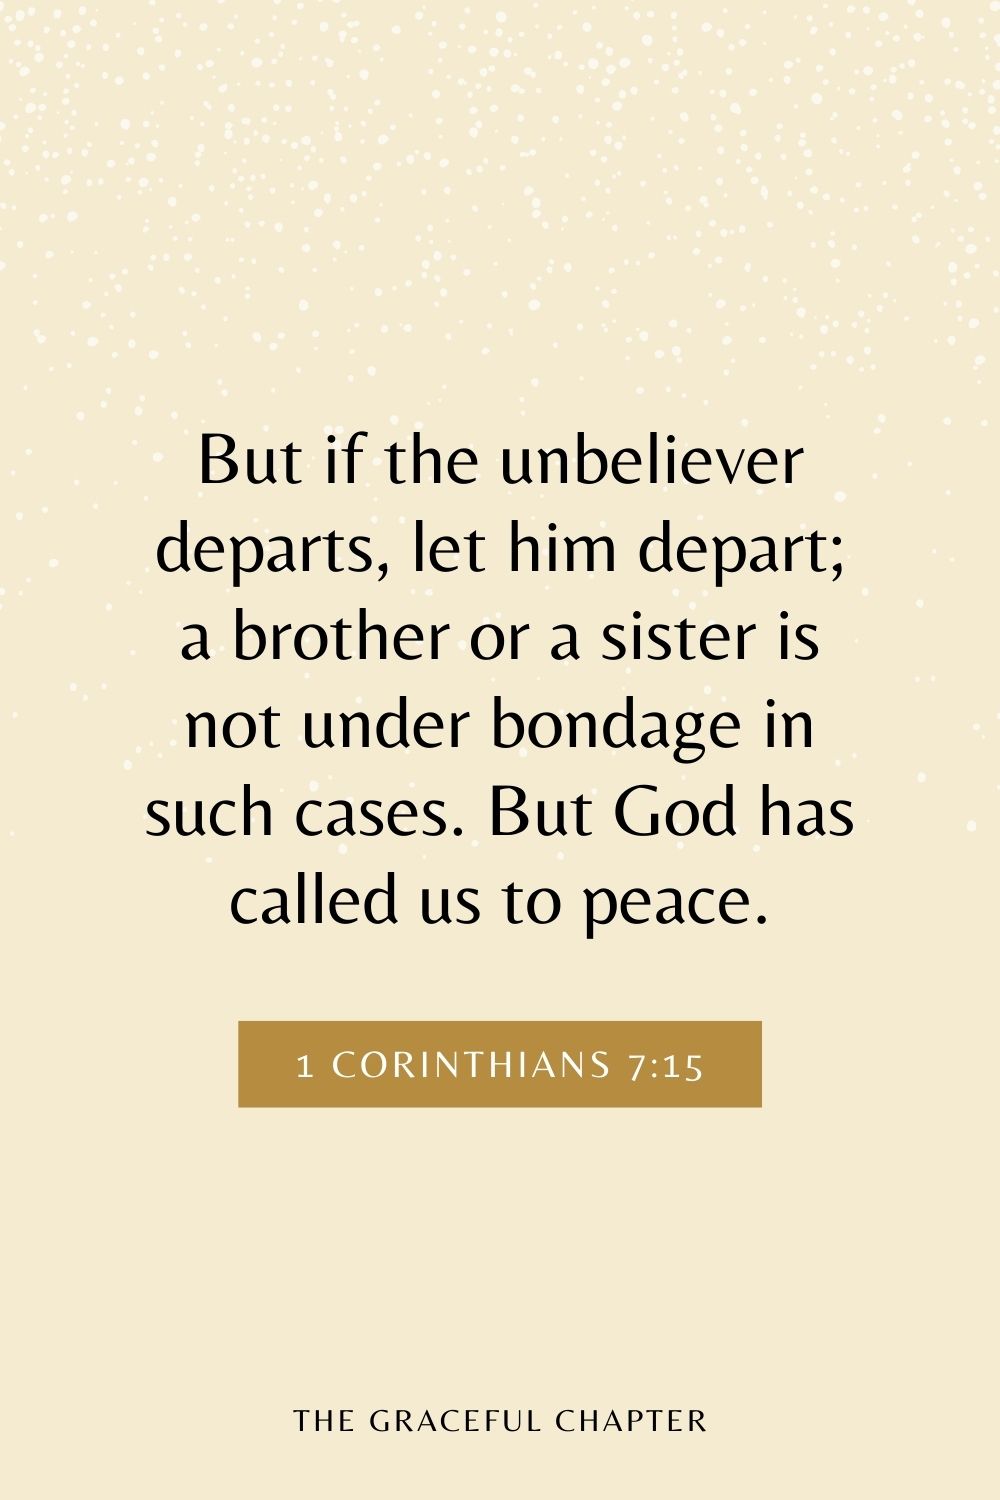 But if the unbeliever departs, let him depart; a brother or a sister is not under bondage in such cases. But God has called us to peace. 1 Corinthians 7:15